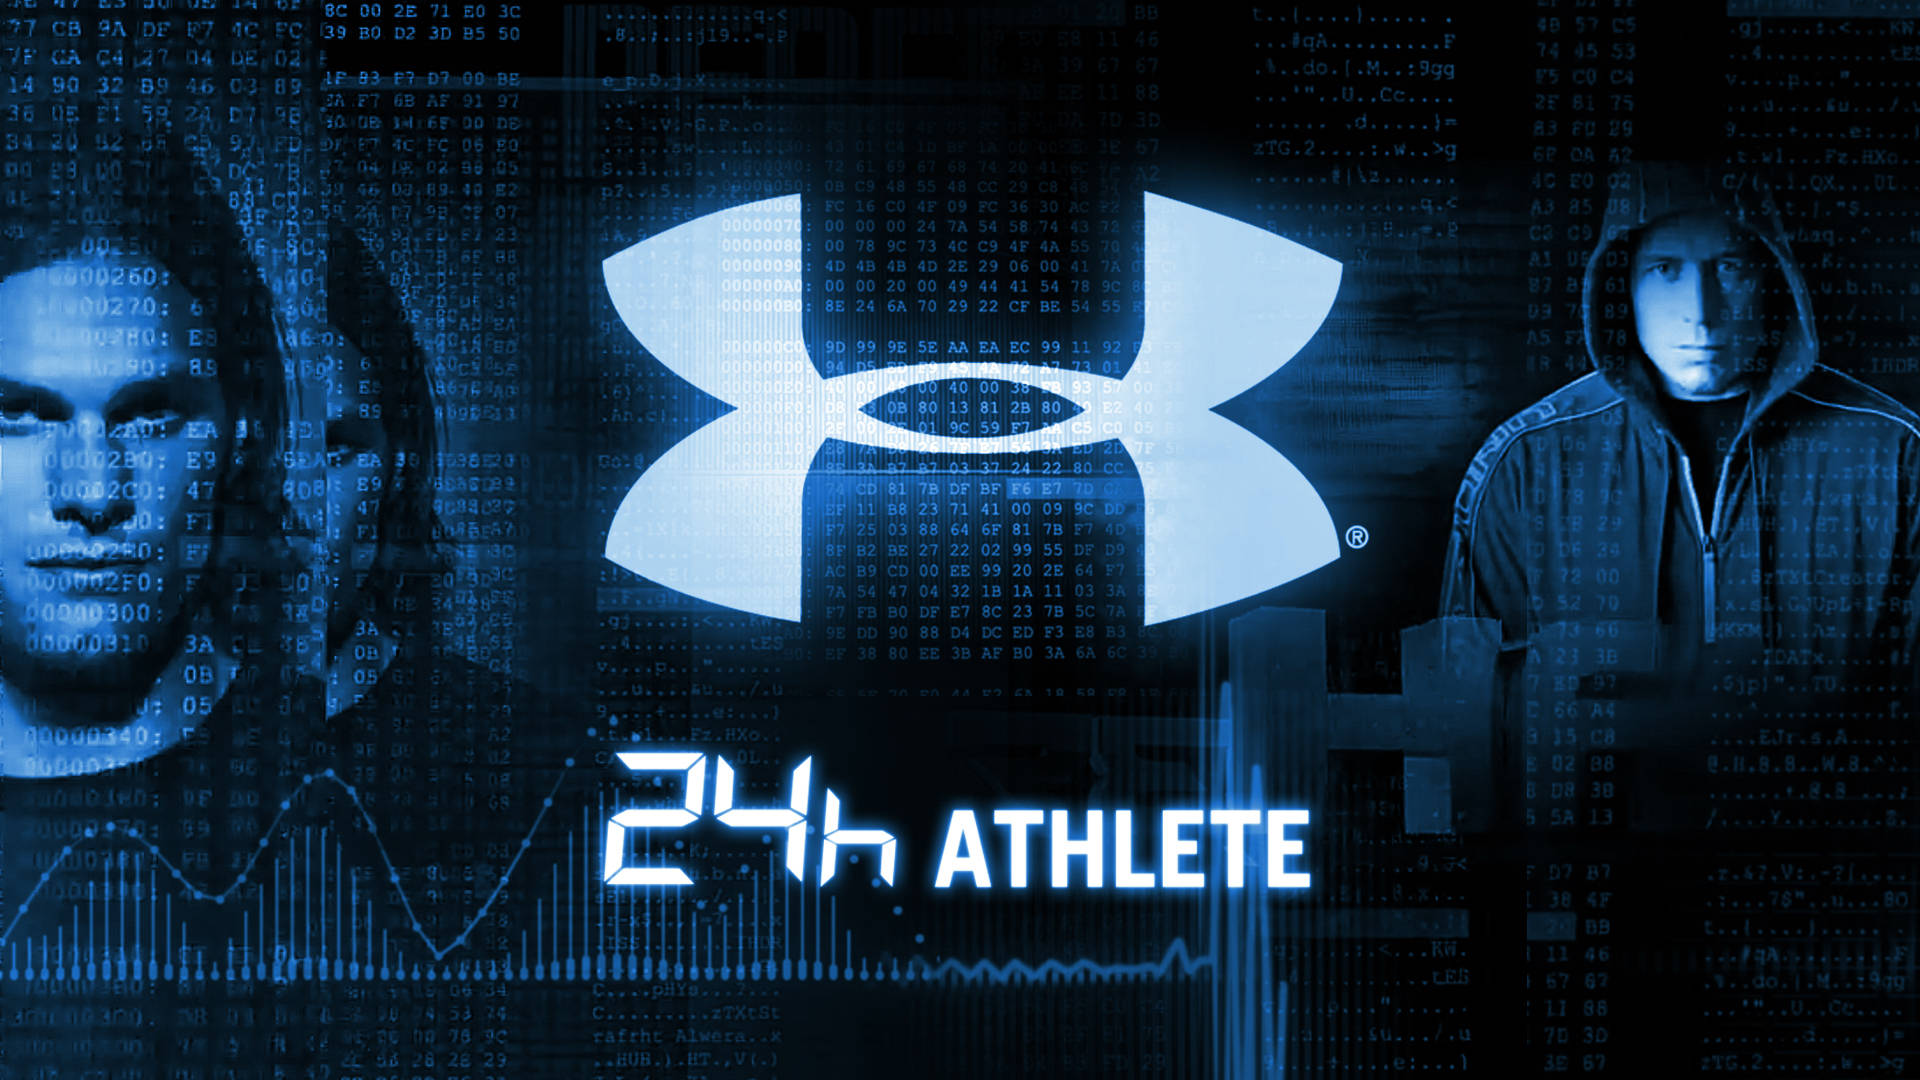 Under Armour 1920X1080 Wallpaper and Background Image